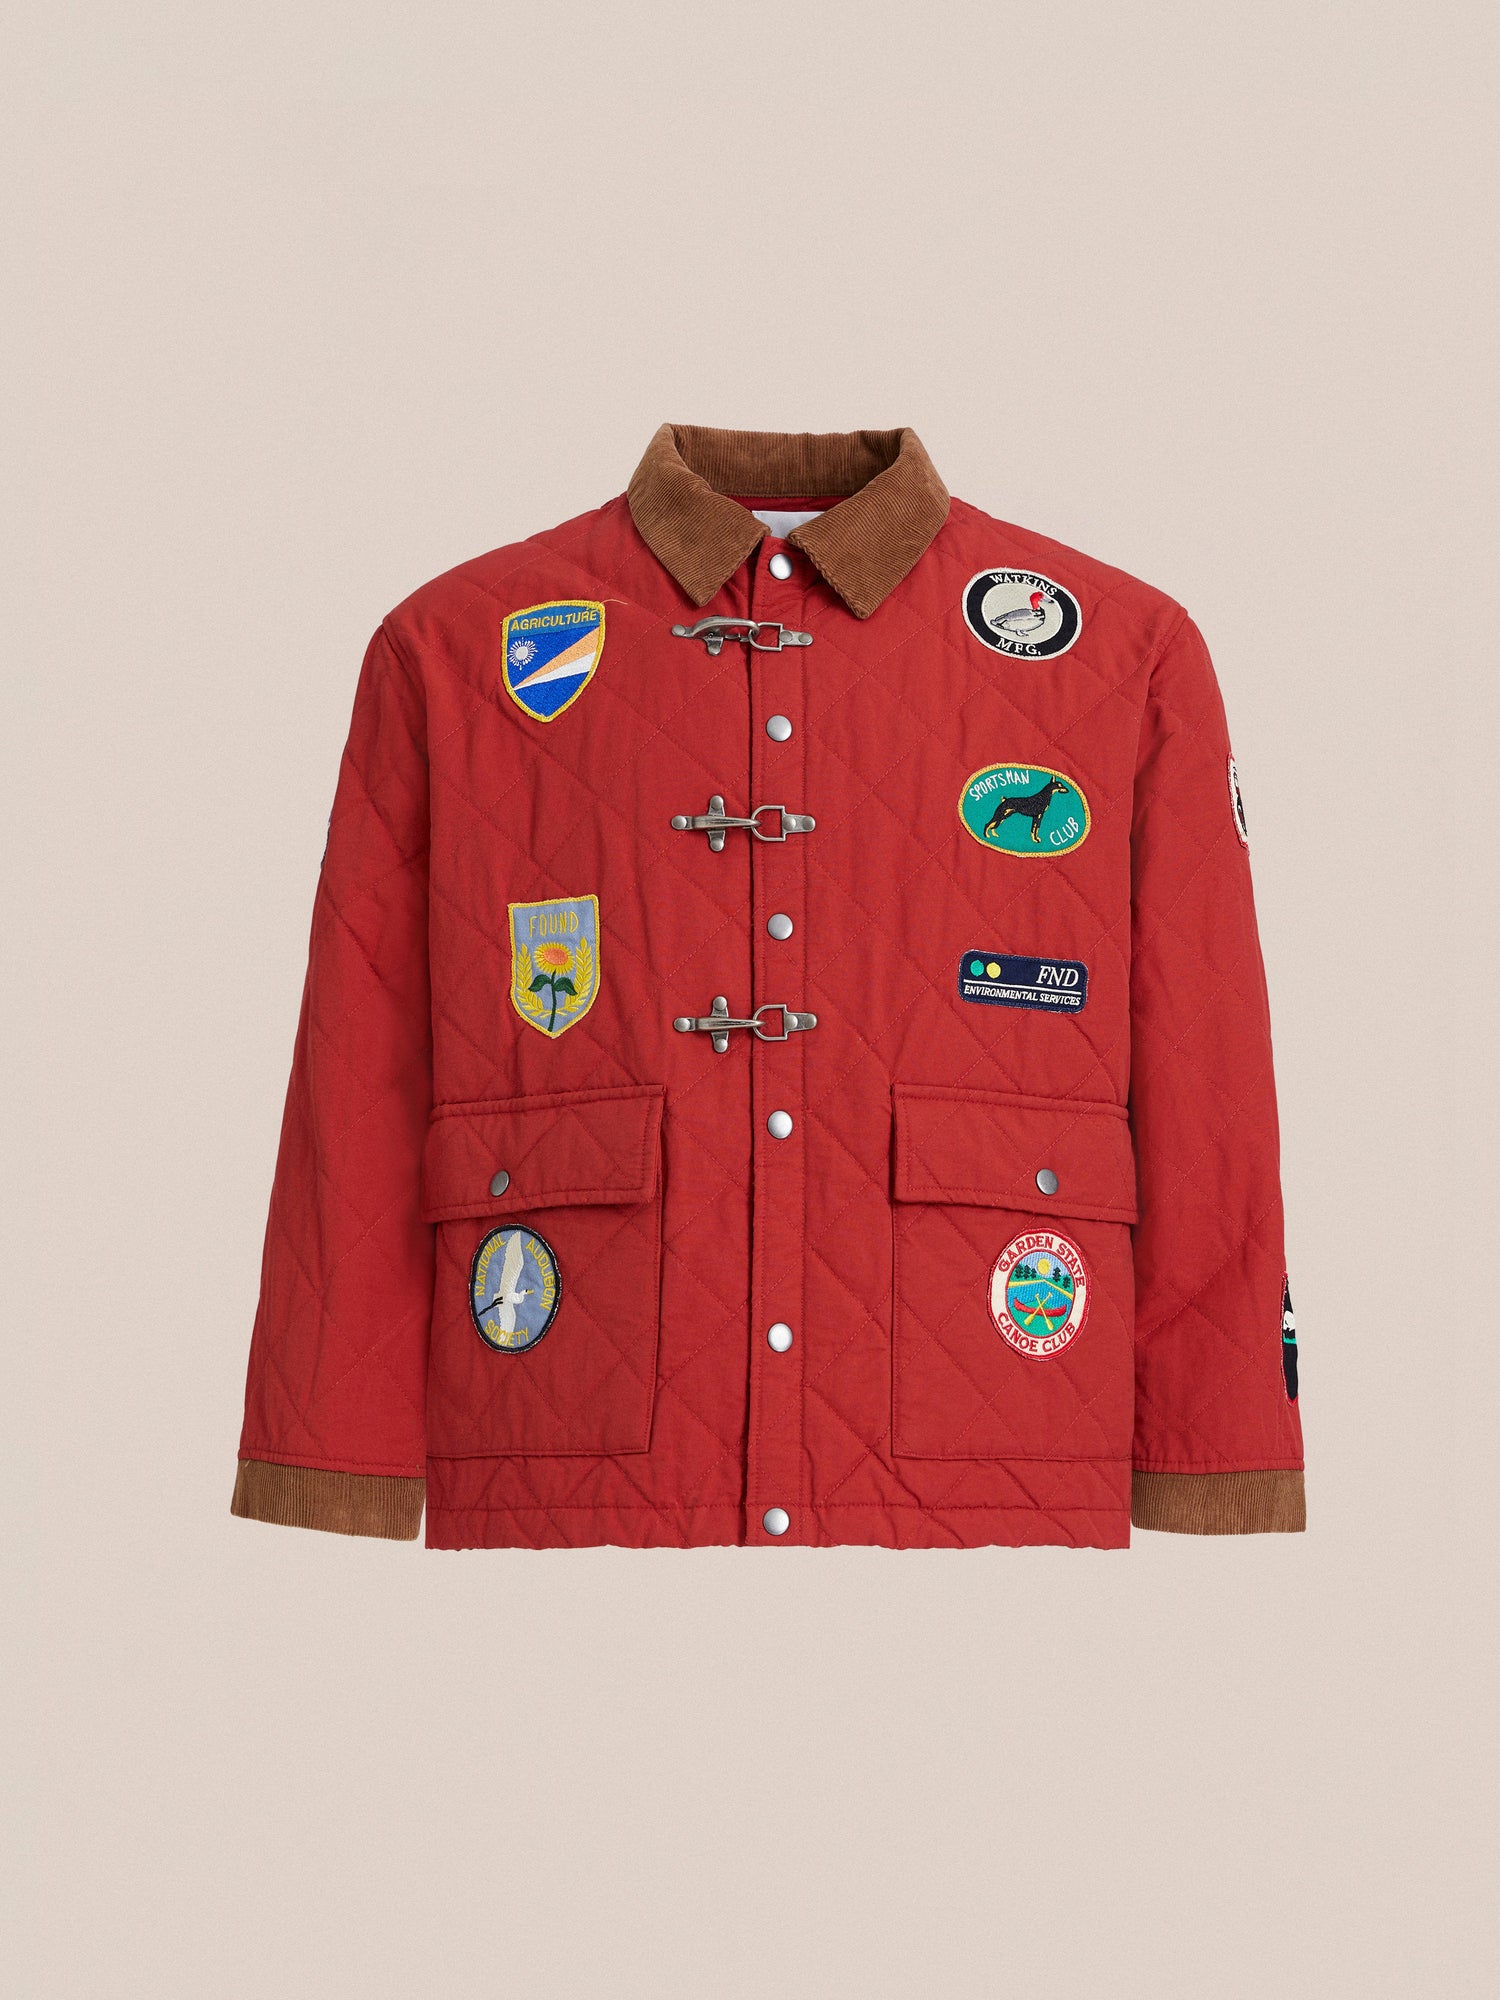 Red quilted Found Farmstead Quilt Patch Jacket with corduroy collar and multiple colorful patches, displayed against a neutral background.